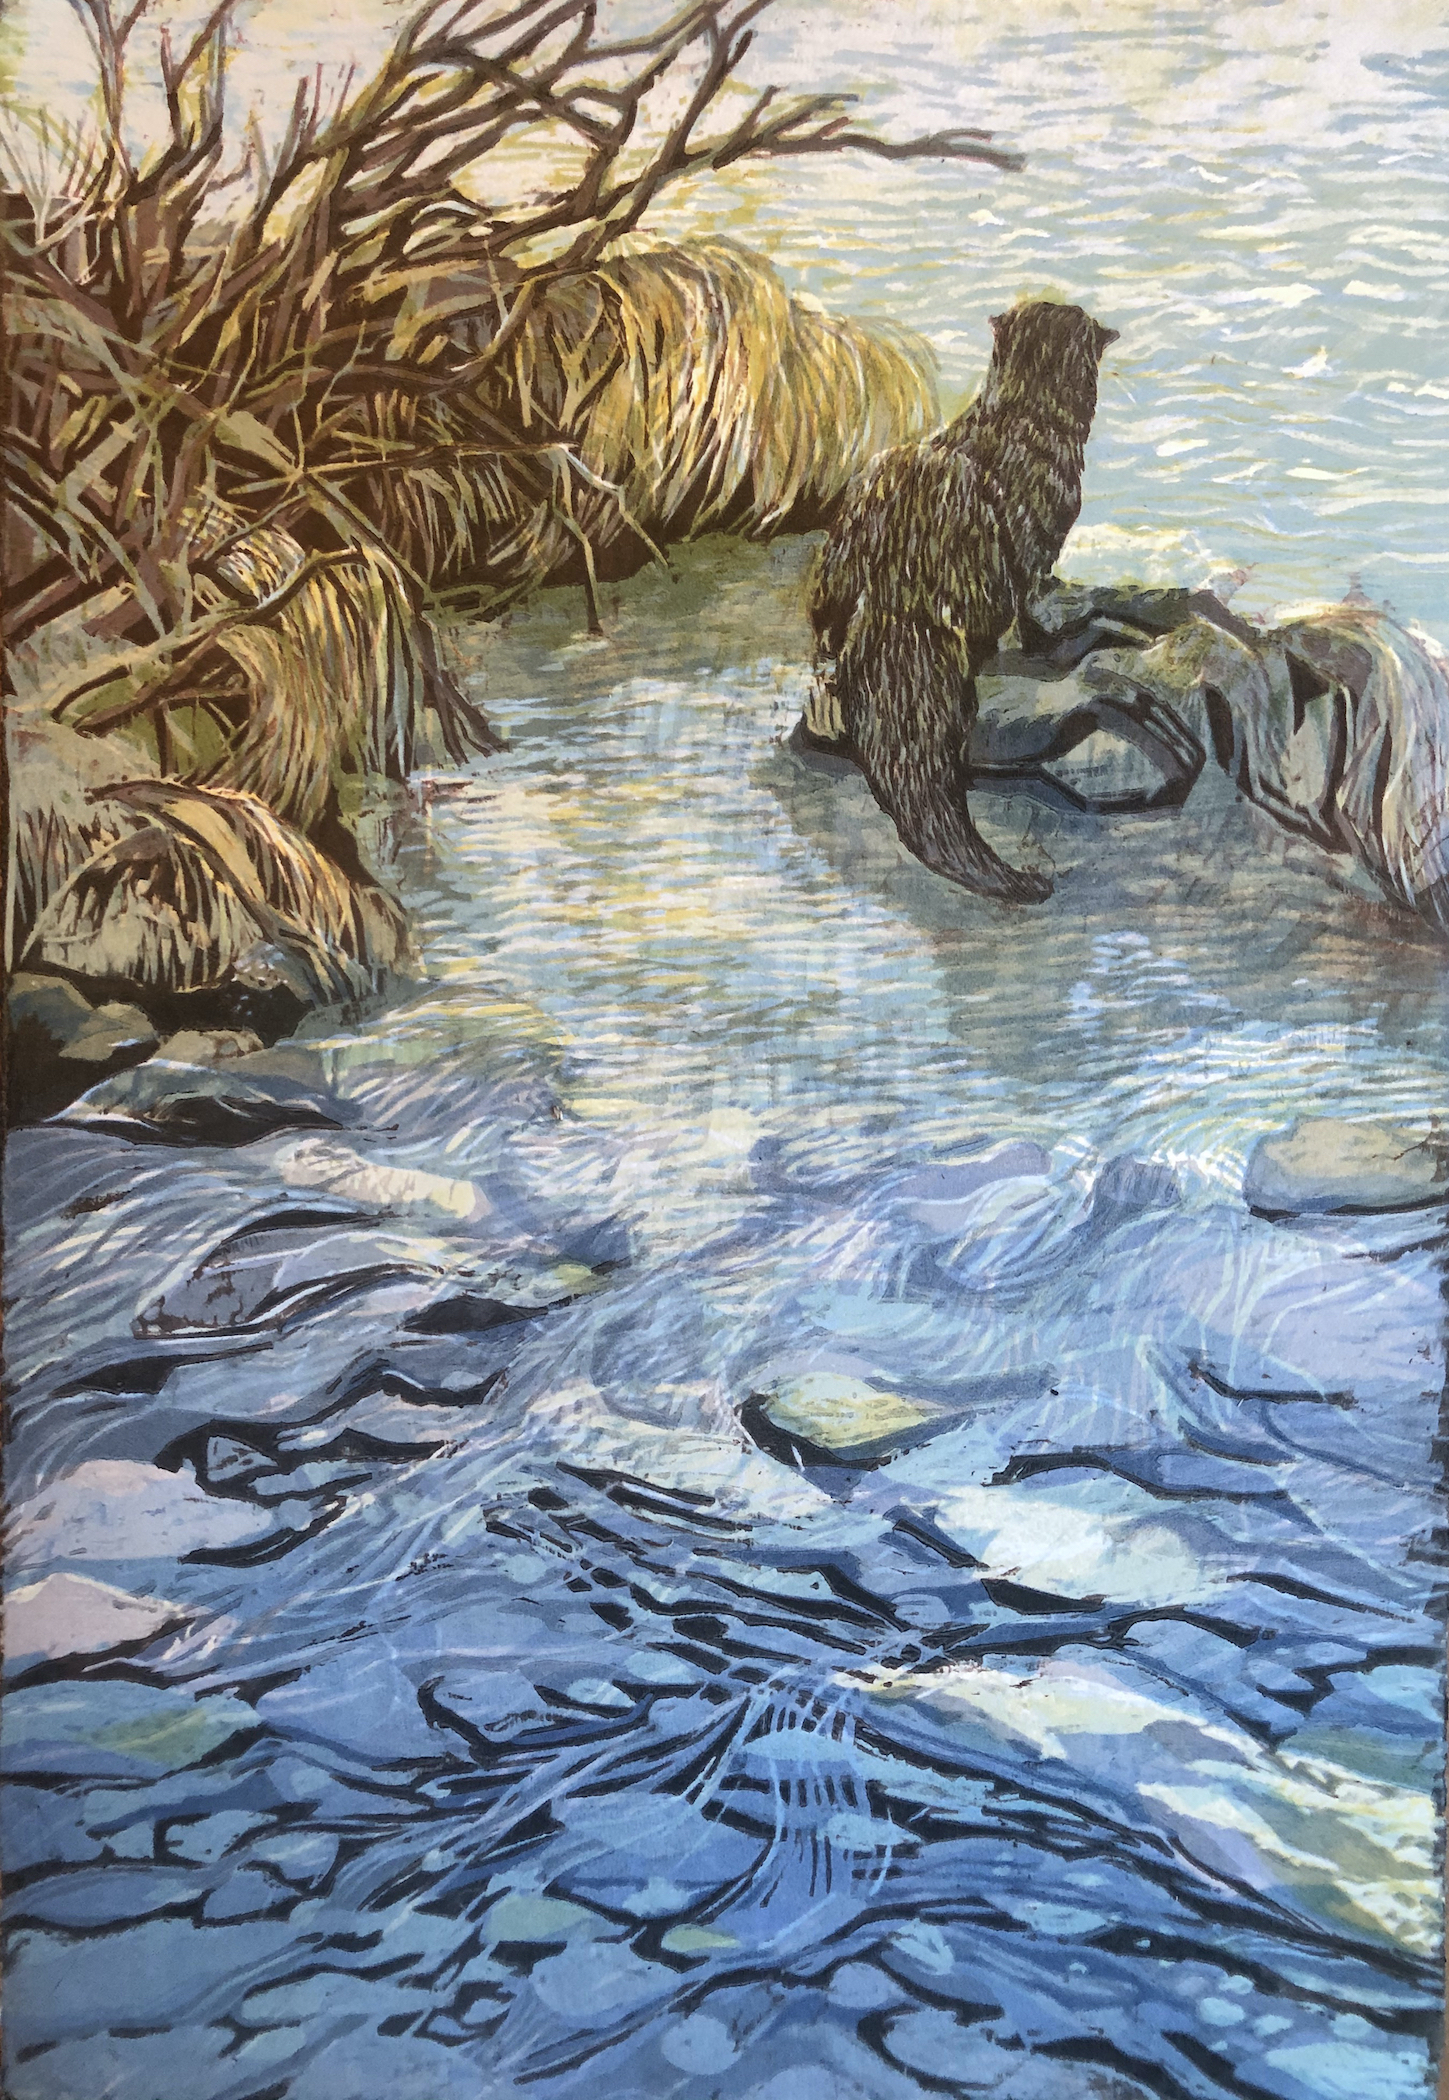 Millie Whipplesmith Plank, Where the River Flows, woodcut print, 22 x16 in, 2020